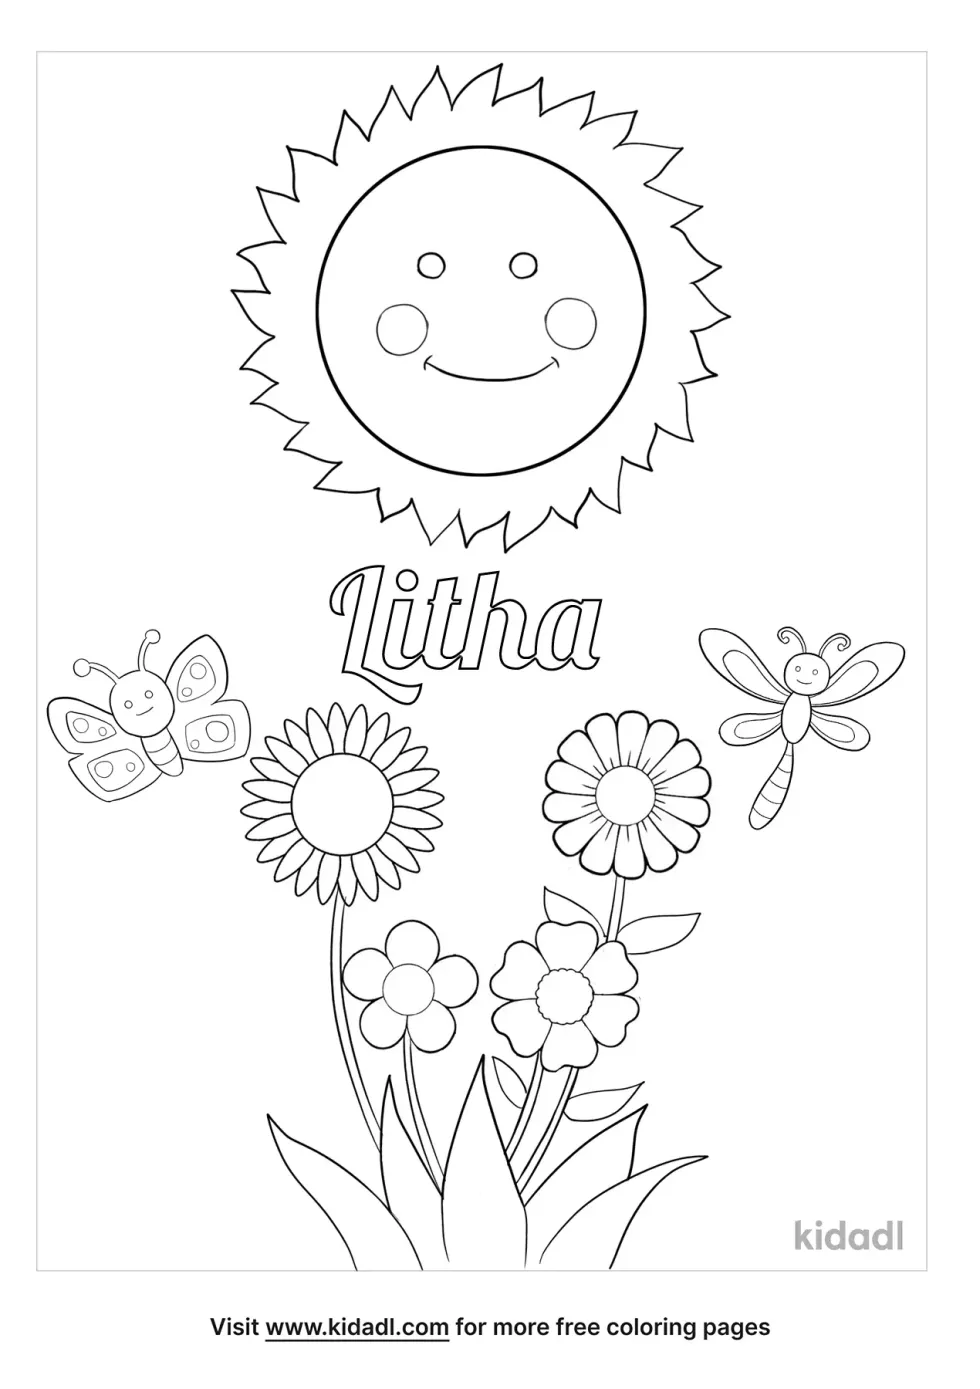 Litha Coloring Page